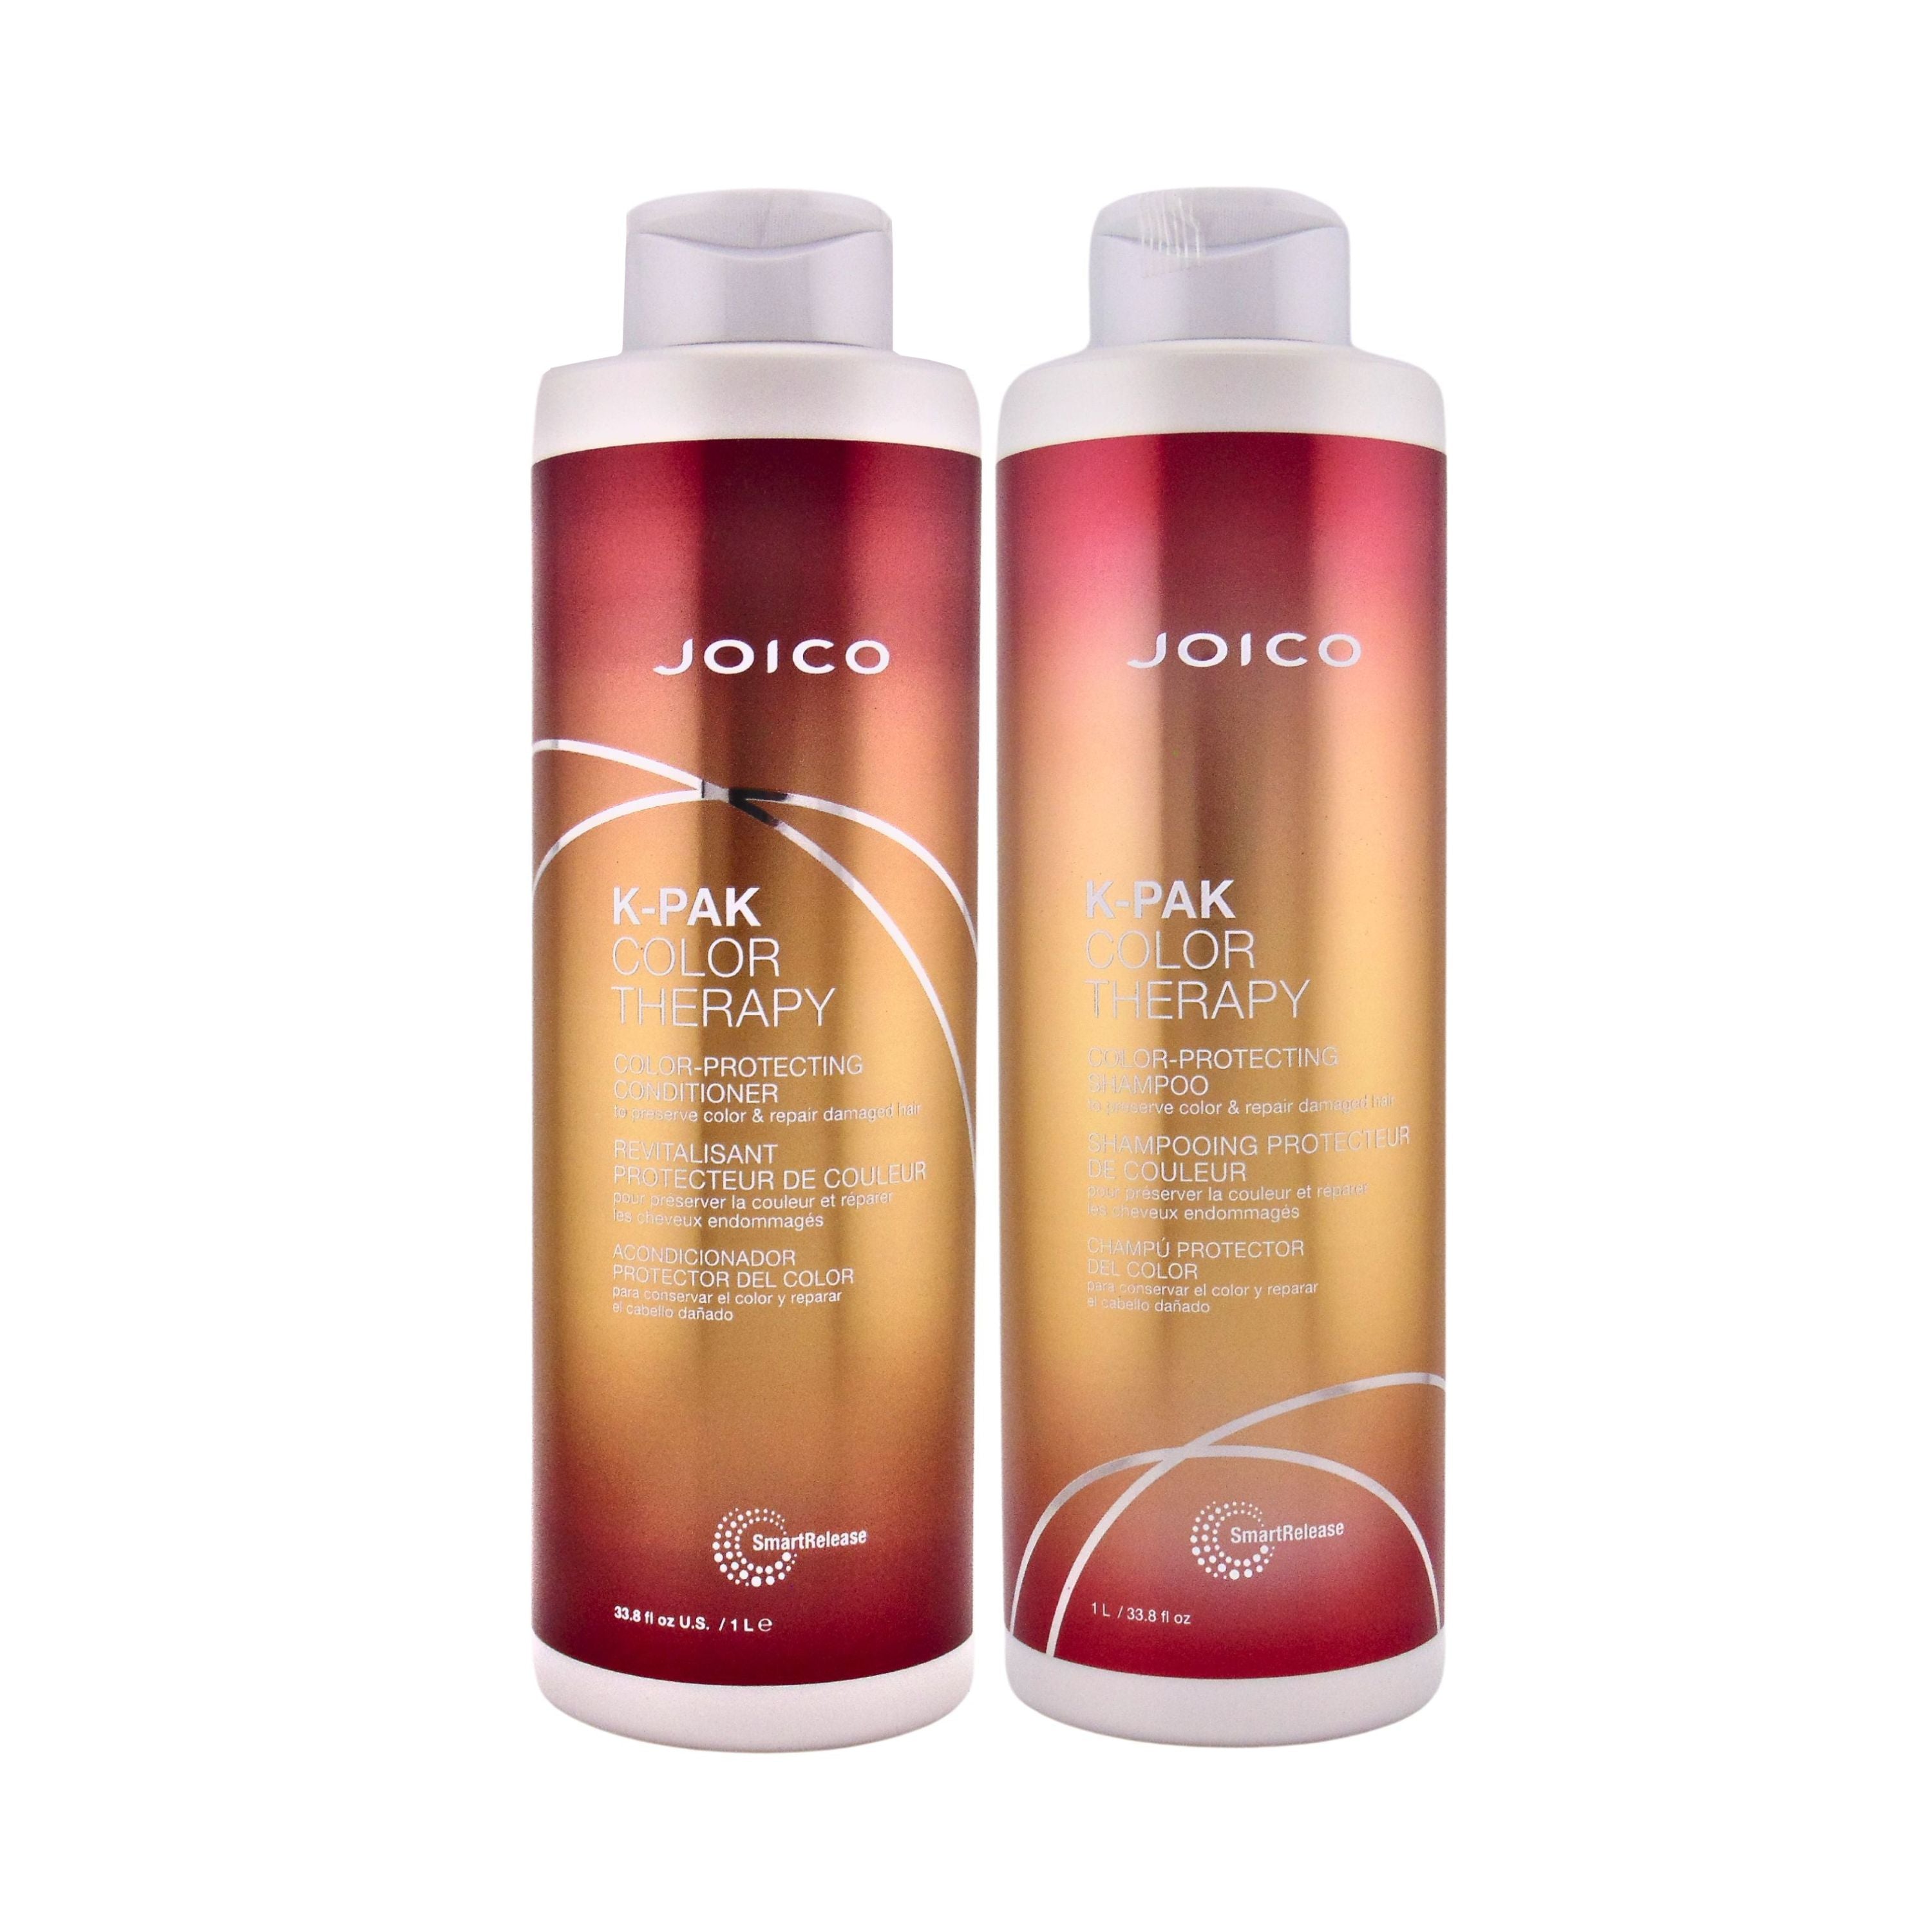 Joico K-Pak Color Therapy Duo (Color-Protecting Shampoo and Conditioner)